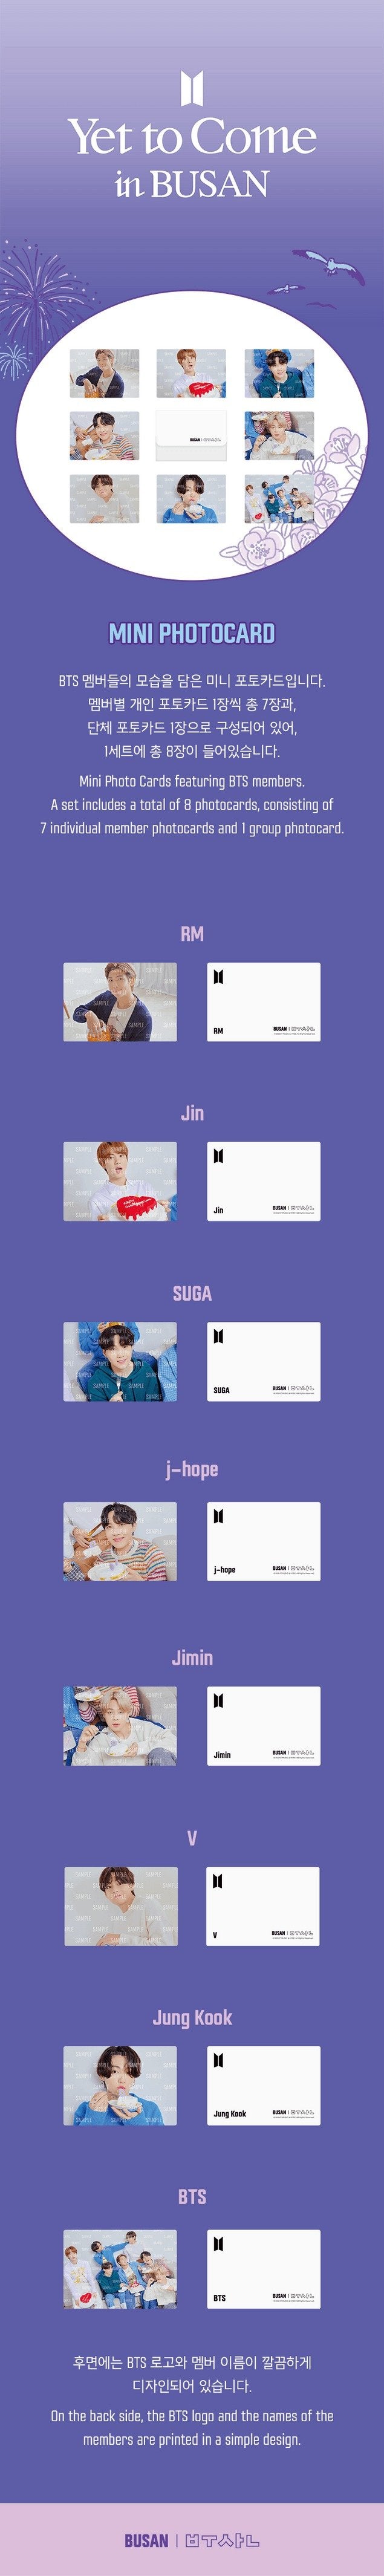 BTS [Yet To Come] Mini Photocard